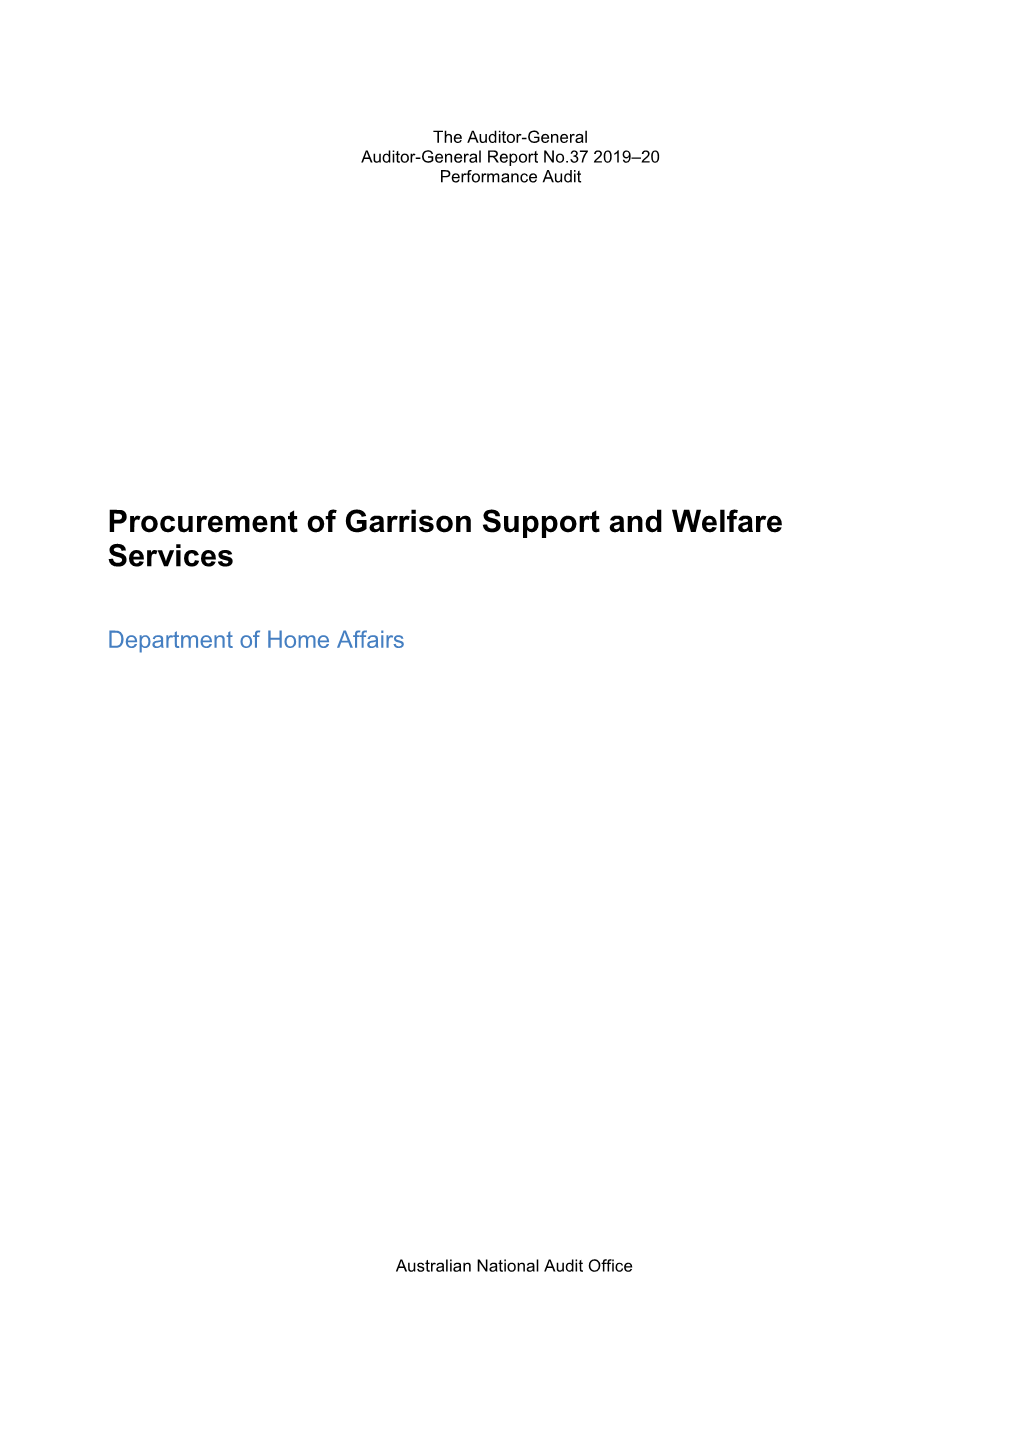 Procurement of Garrison Support and Welfare Services